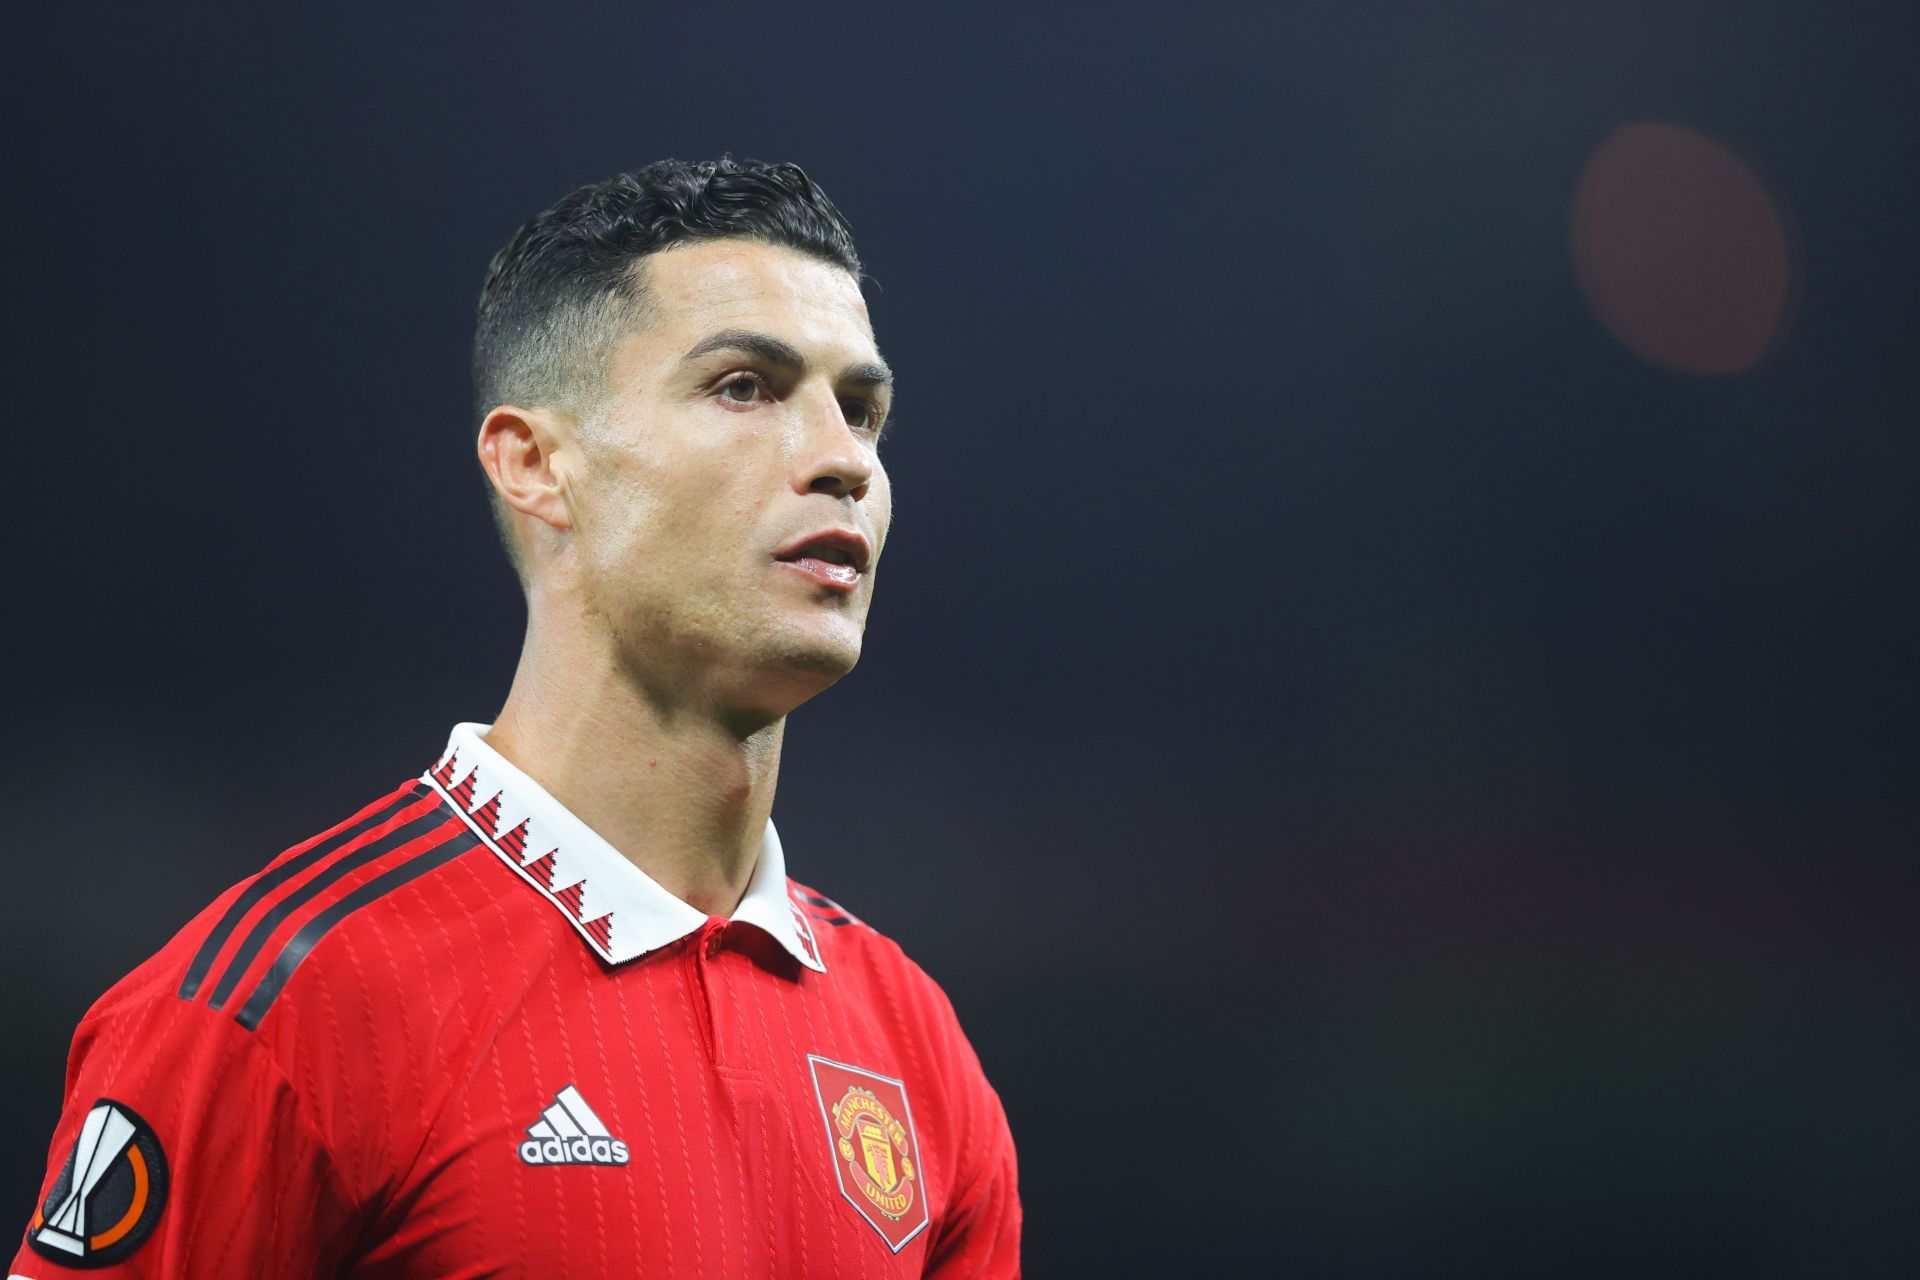 Cristian Ronaldo wishes to leave Manchester United after the club missed out on Champions League qualification.